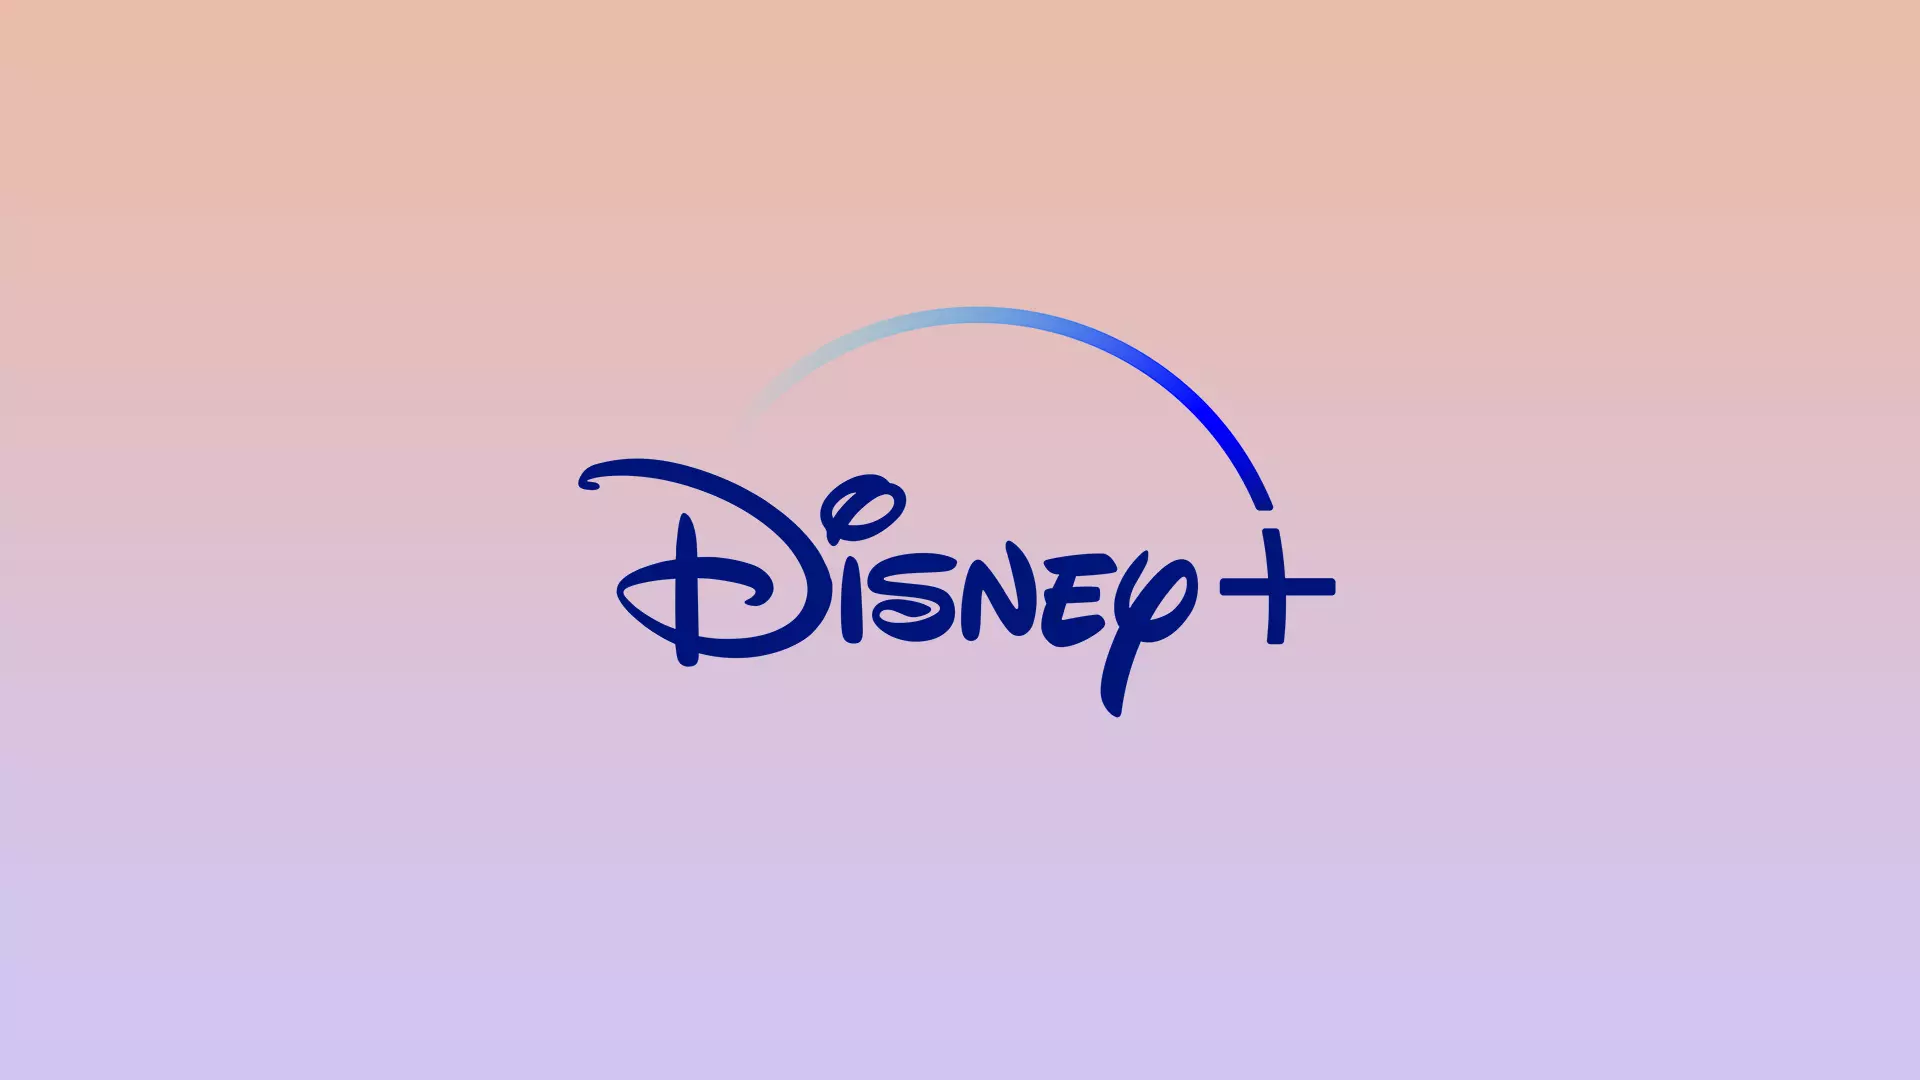 Disney plans to add a special 'Disney Prime' subscription